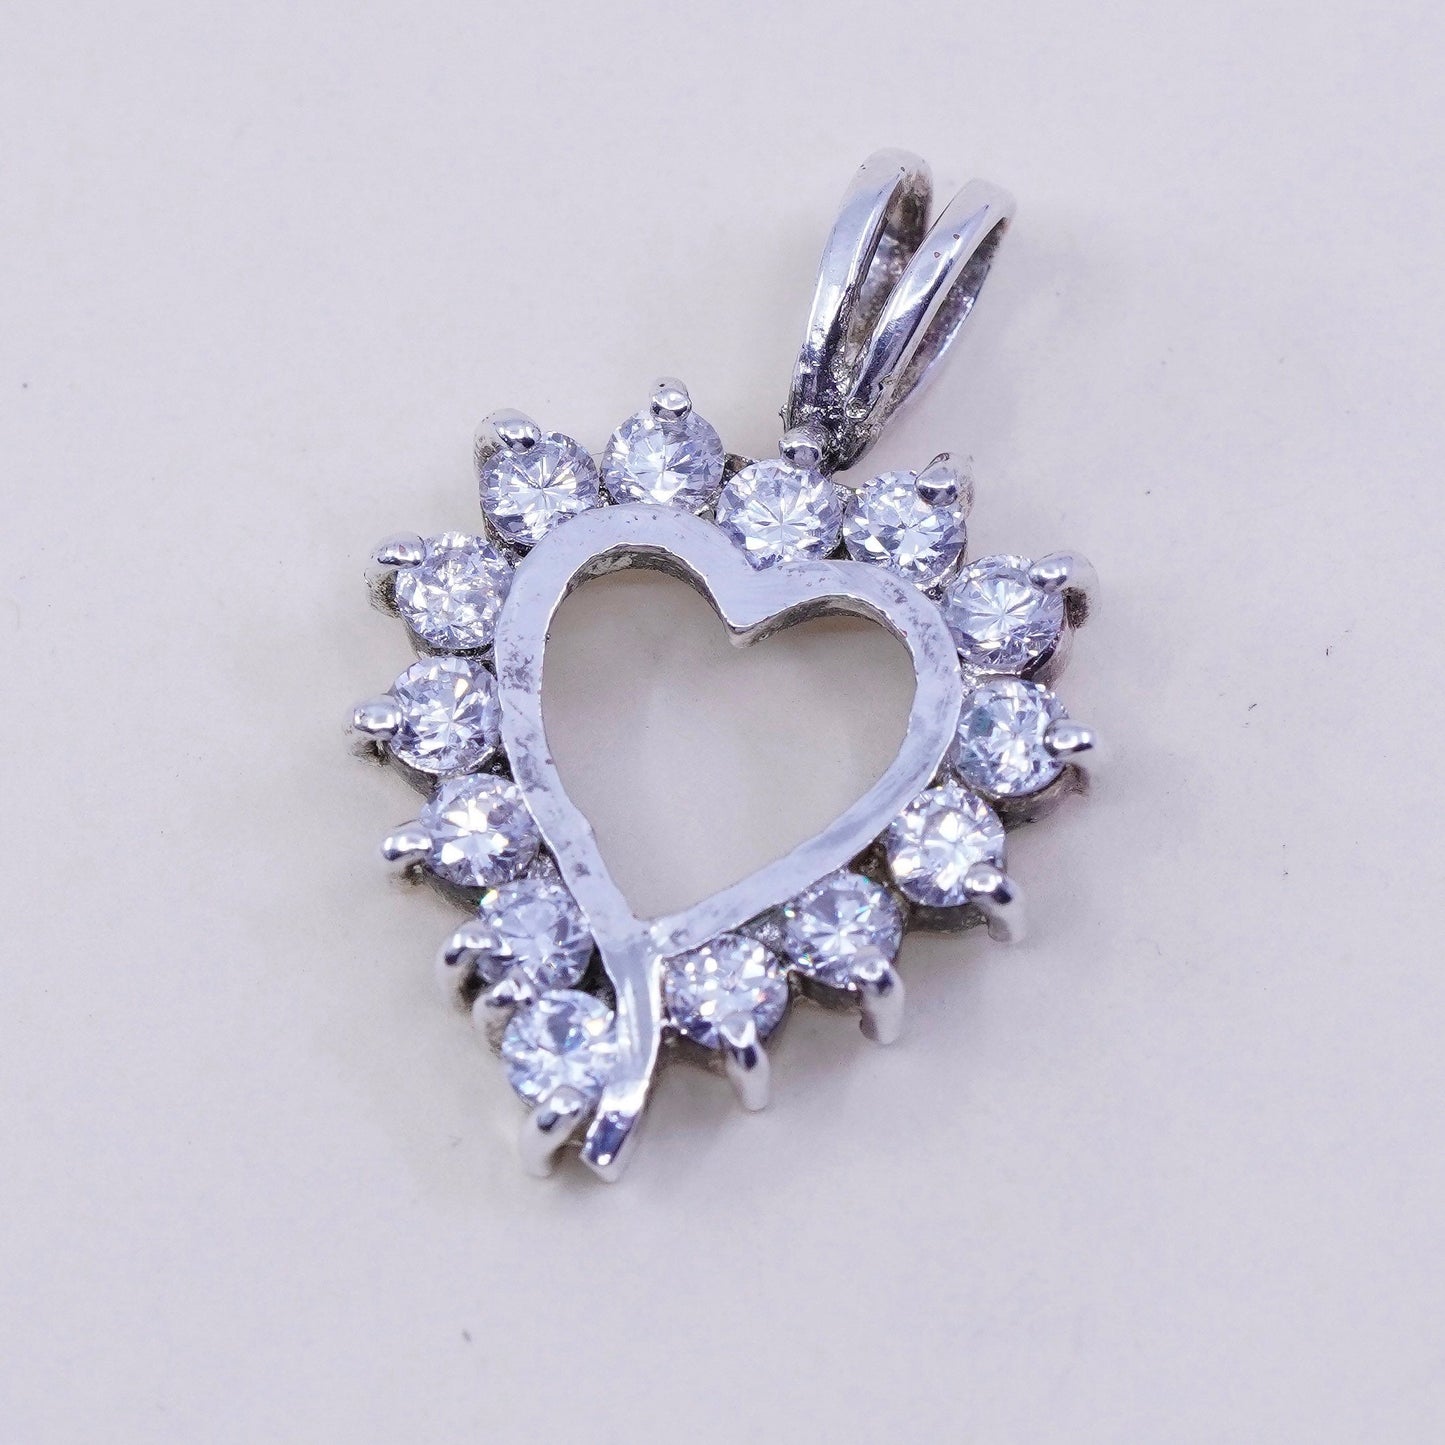 Vintage sterling 925 silver heart pendant with cluster clear Cz around